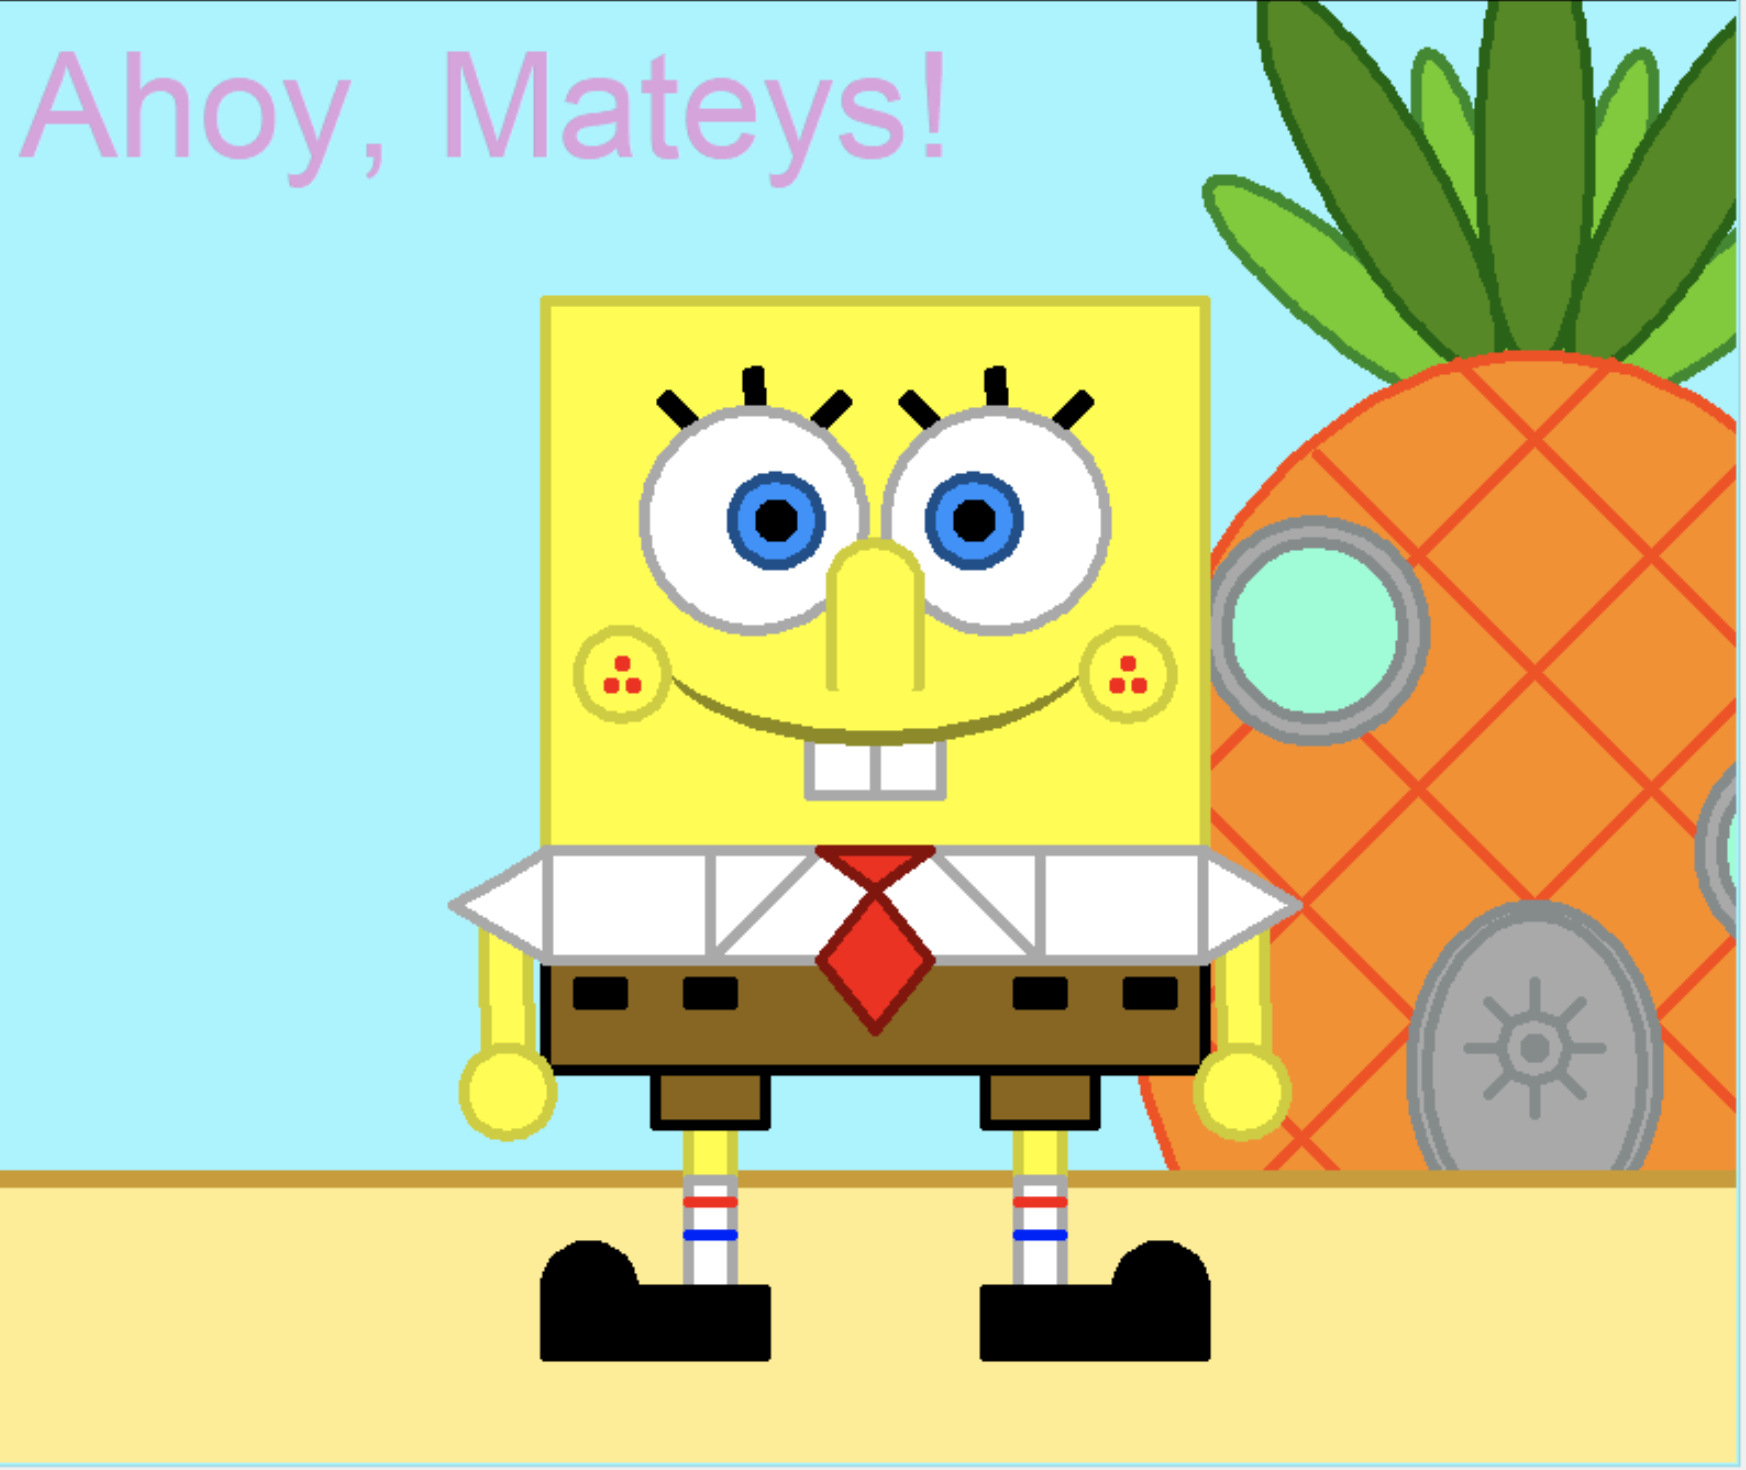 An image of SpongeBob Squarepants, standing in front of his pineapple house with text saying Ahoy Mateys created by Mattie Lyons.